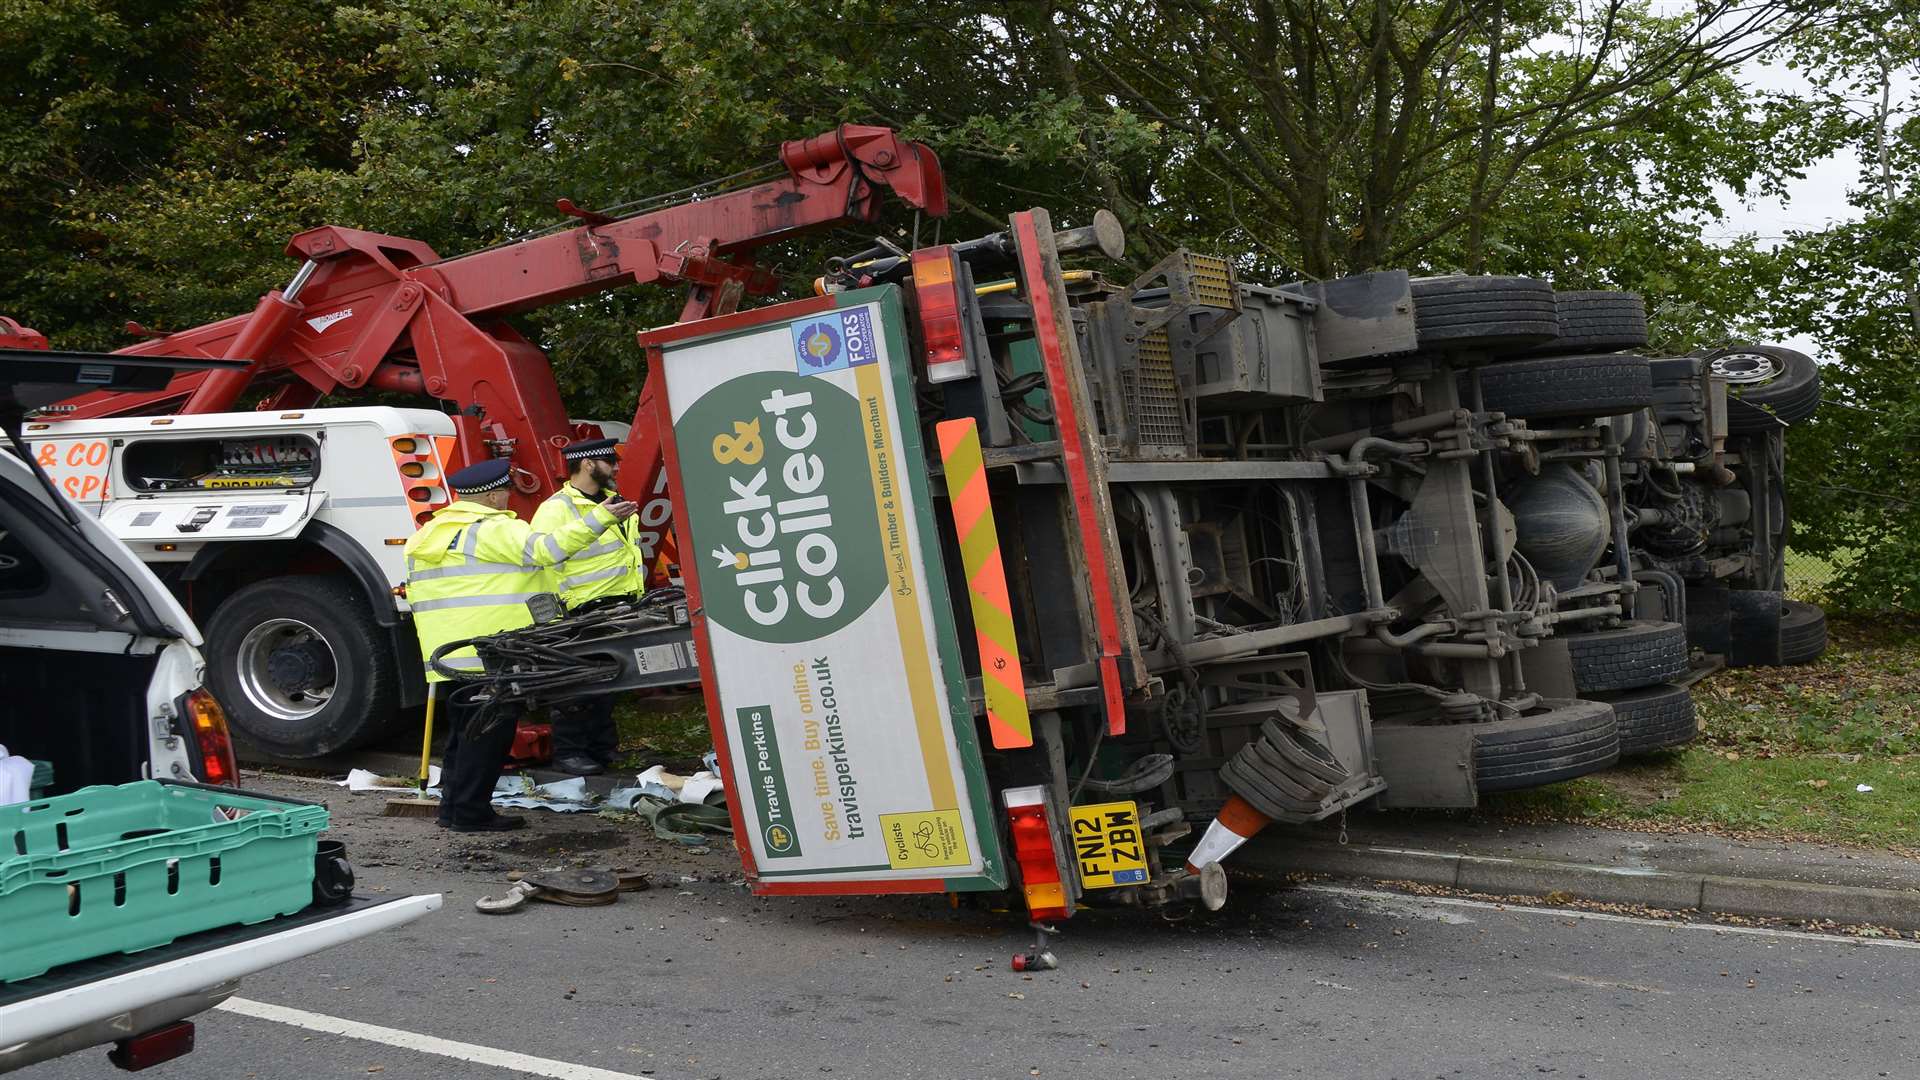 The Travis Perkins lorry on its side. Picture: Paul Amos